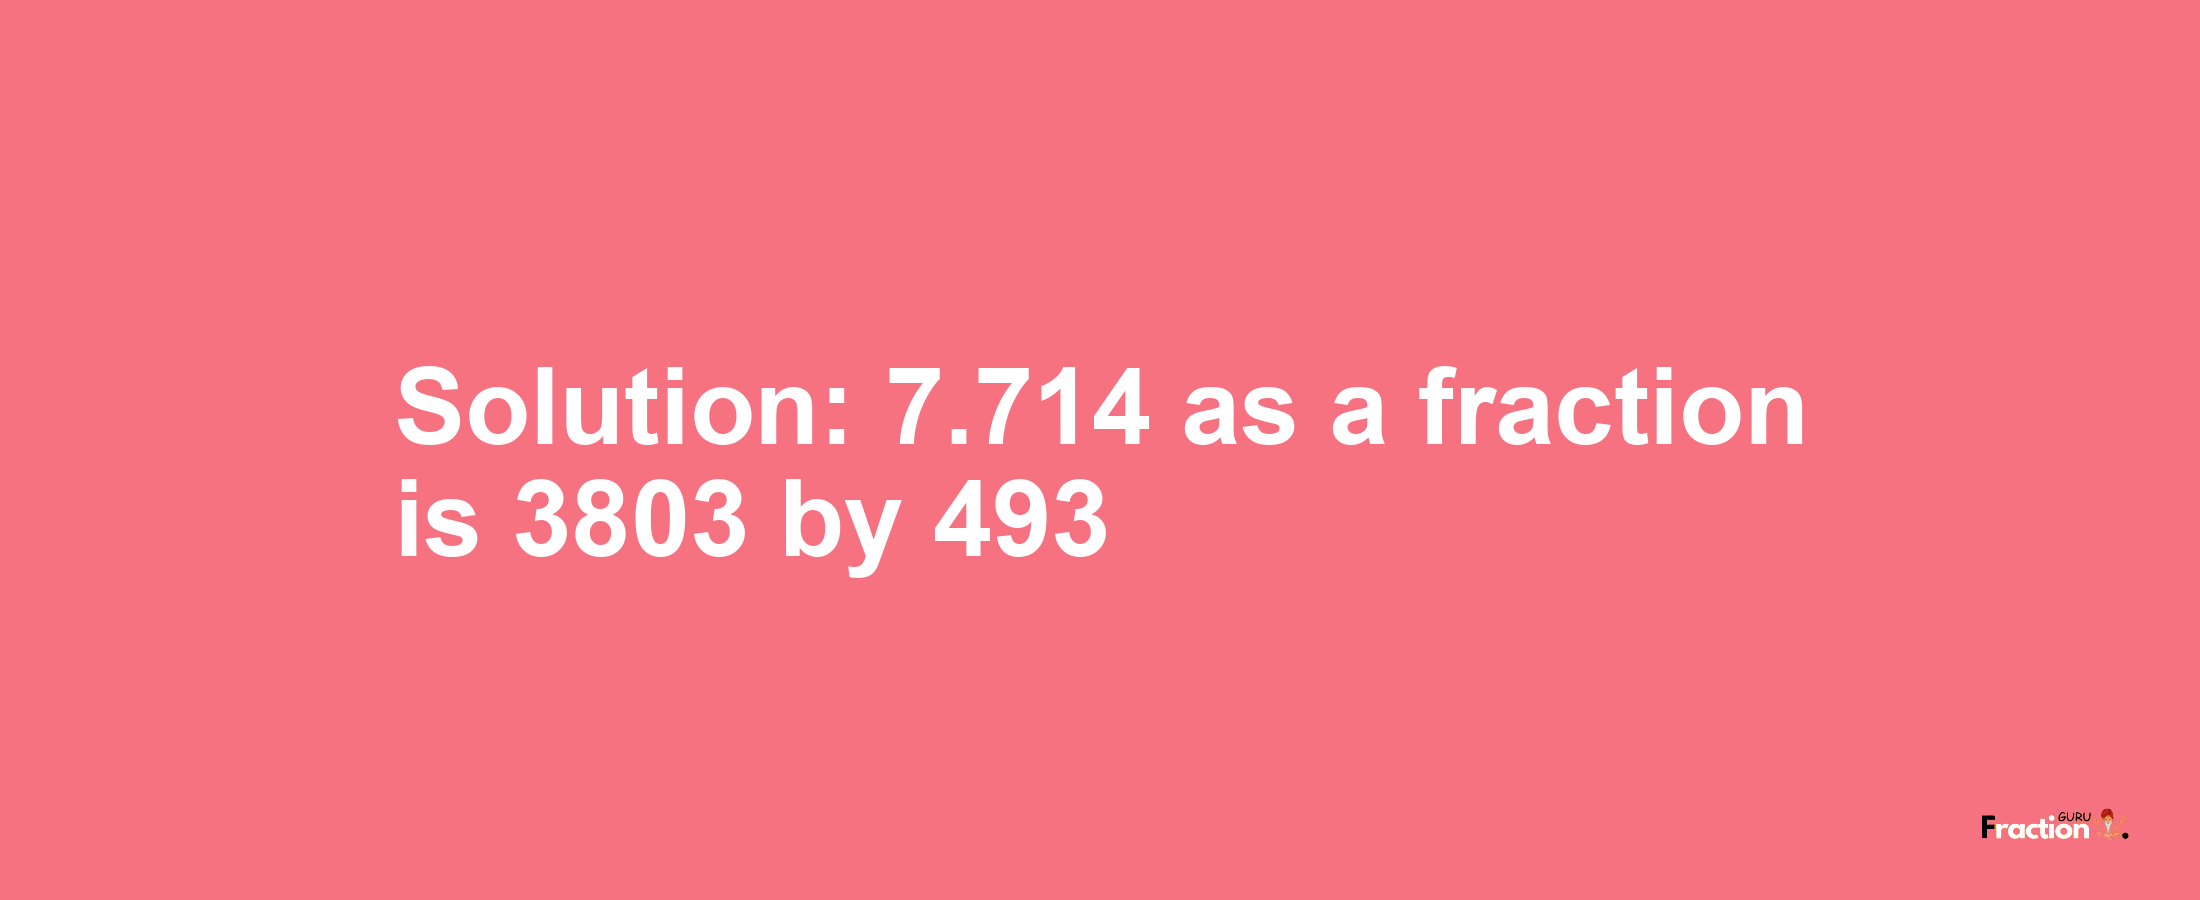 Solution:7.714 as a fraction is 3803/493